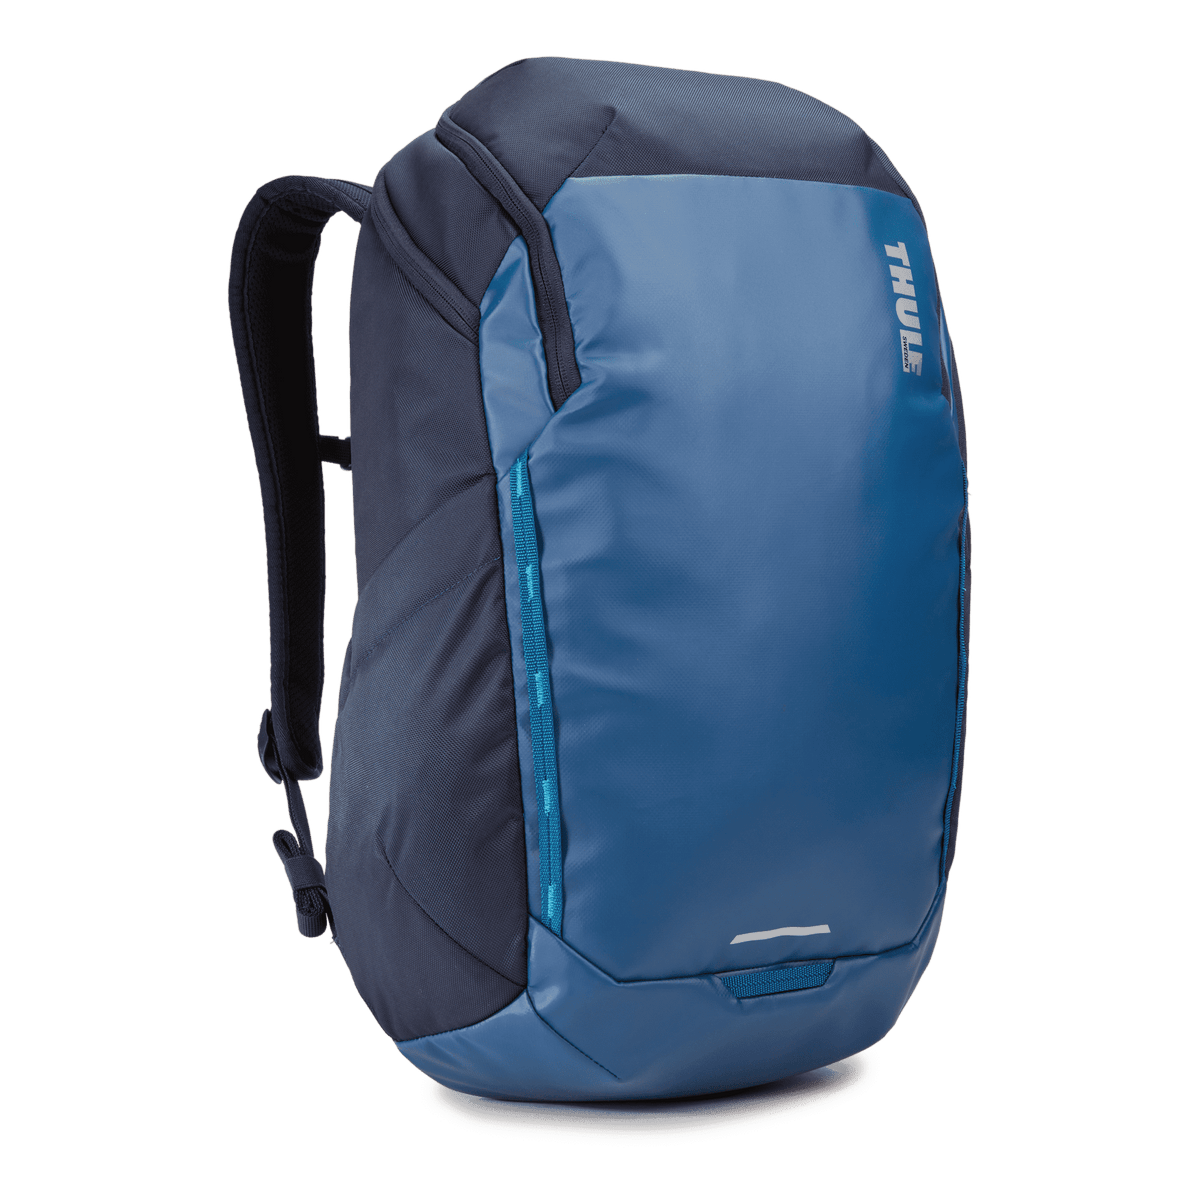 Thule EnRoute backpack 23L – Altman Luggage